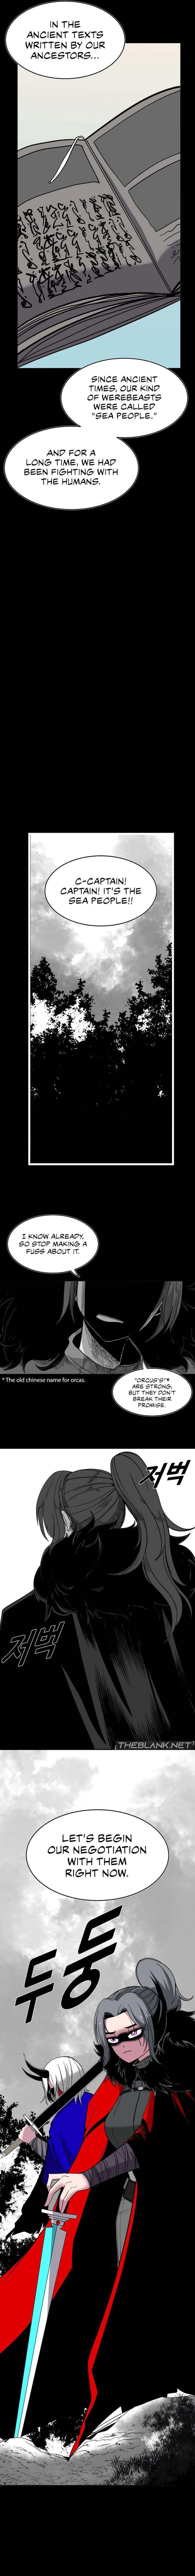 Double Life of Gukbap - Chapter 6 Page 9